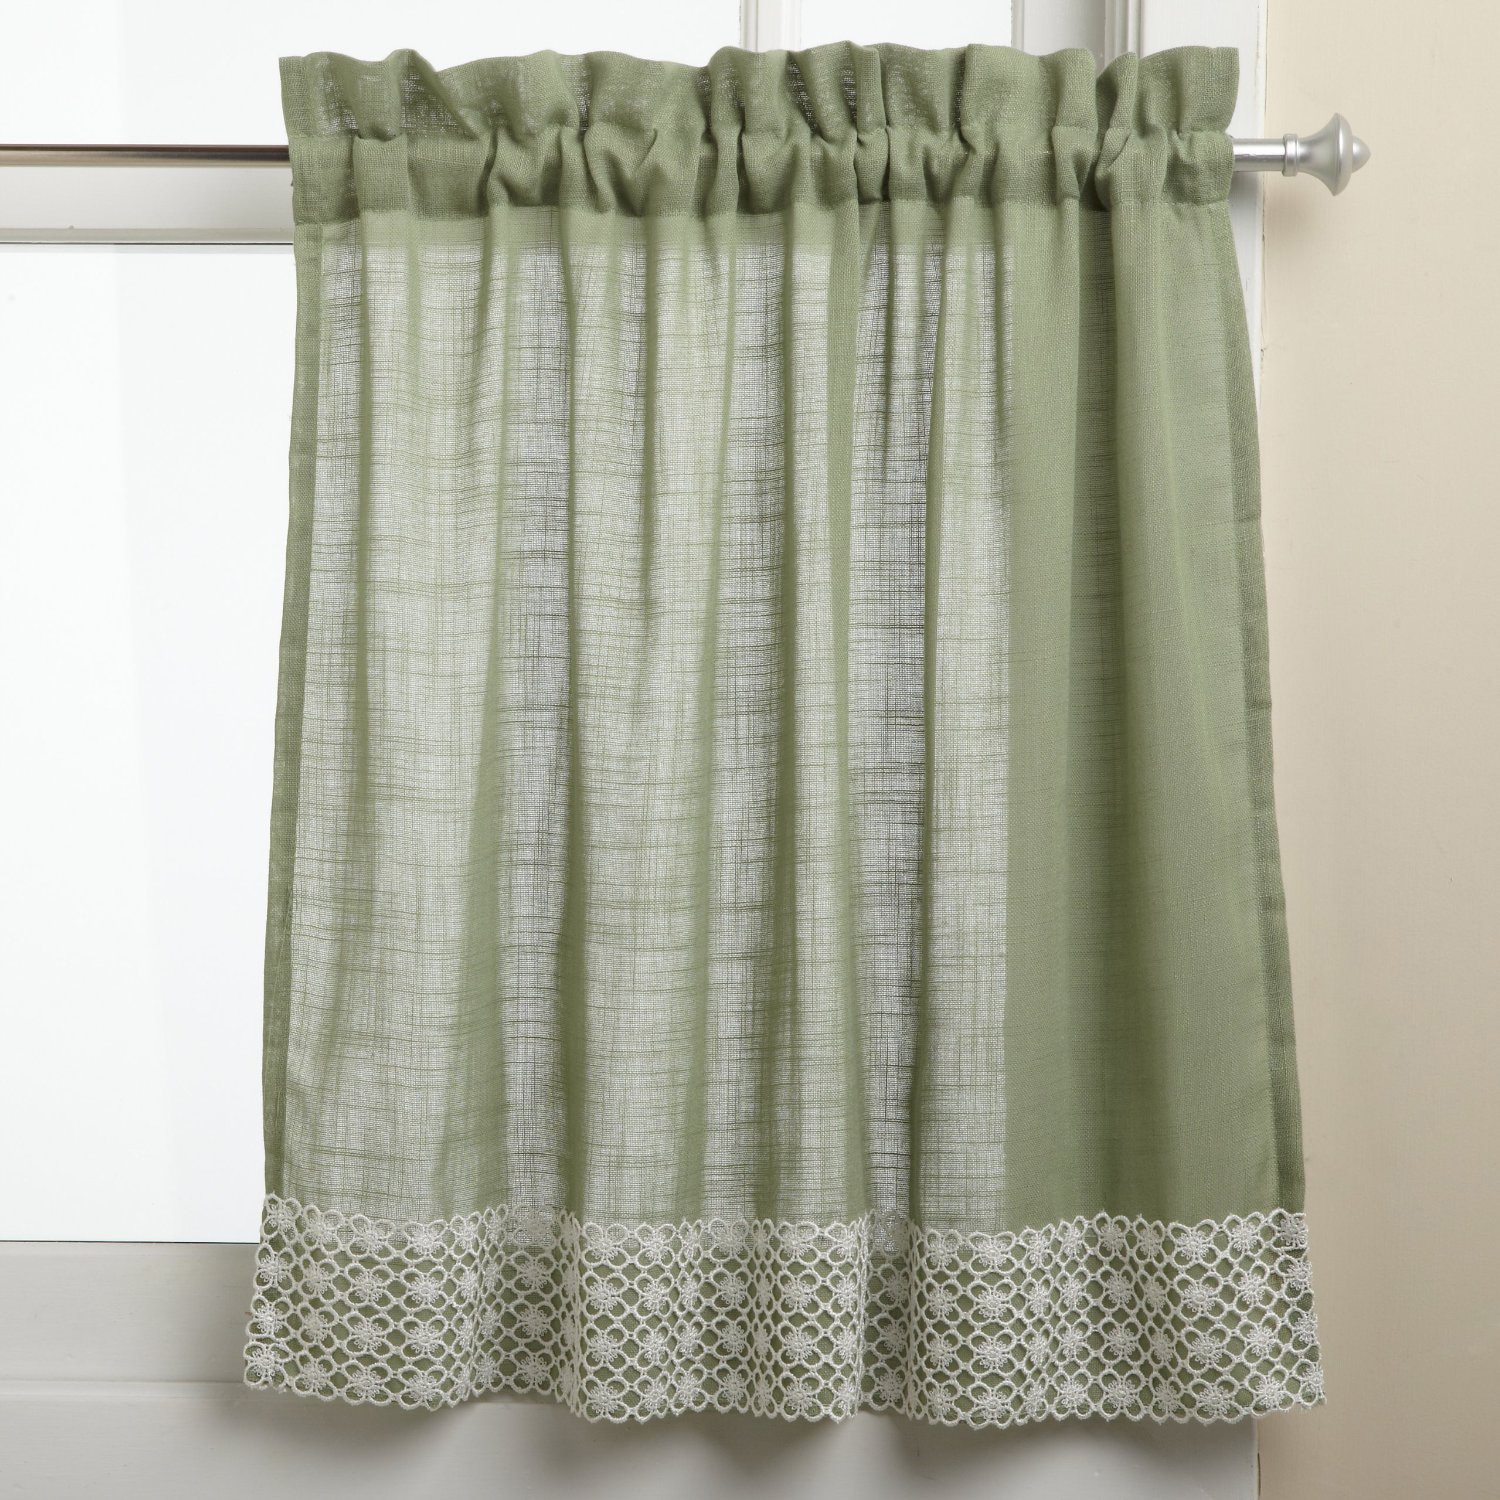 Shop Sage Country Style Curtain Parts With White Daisy Lace Accent